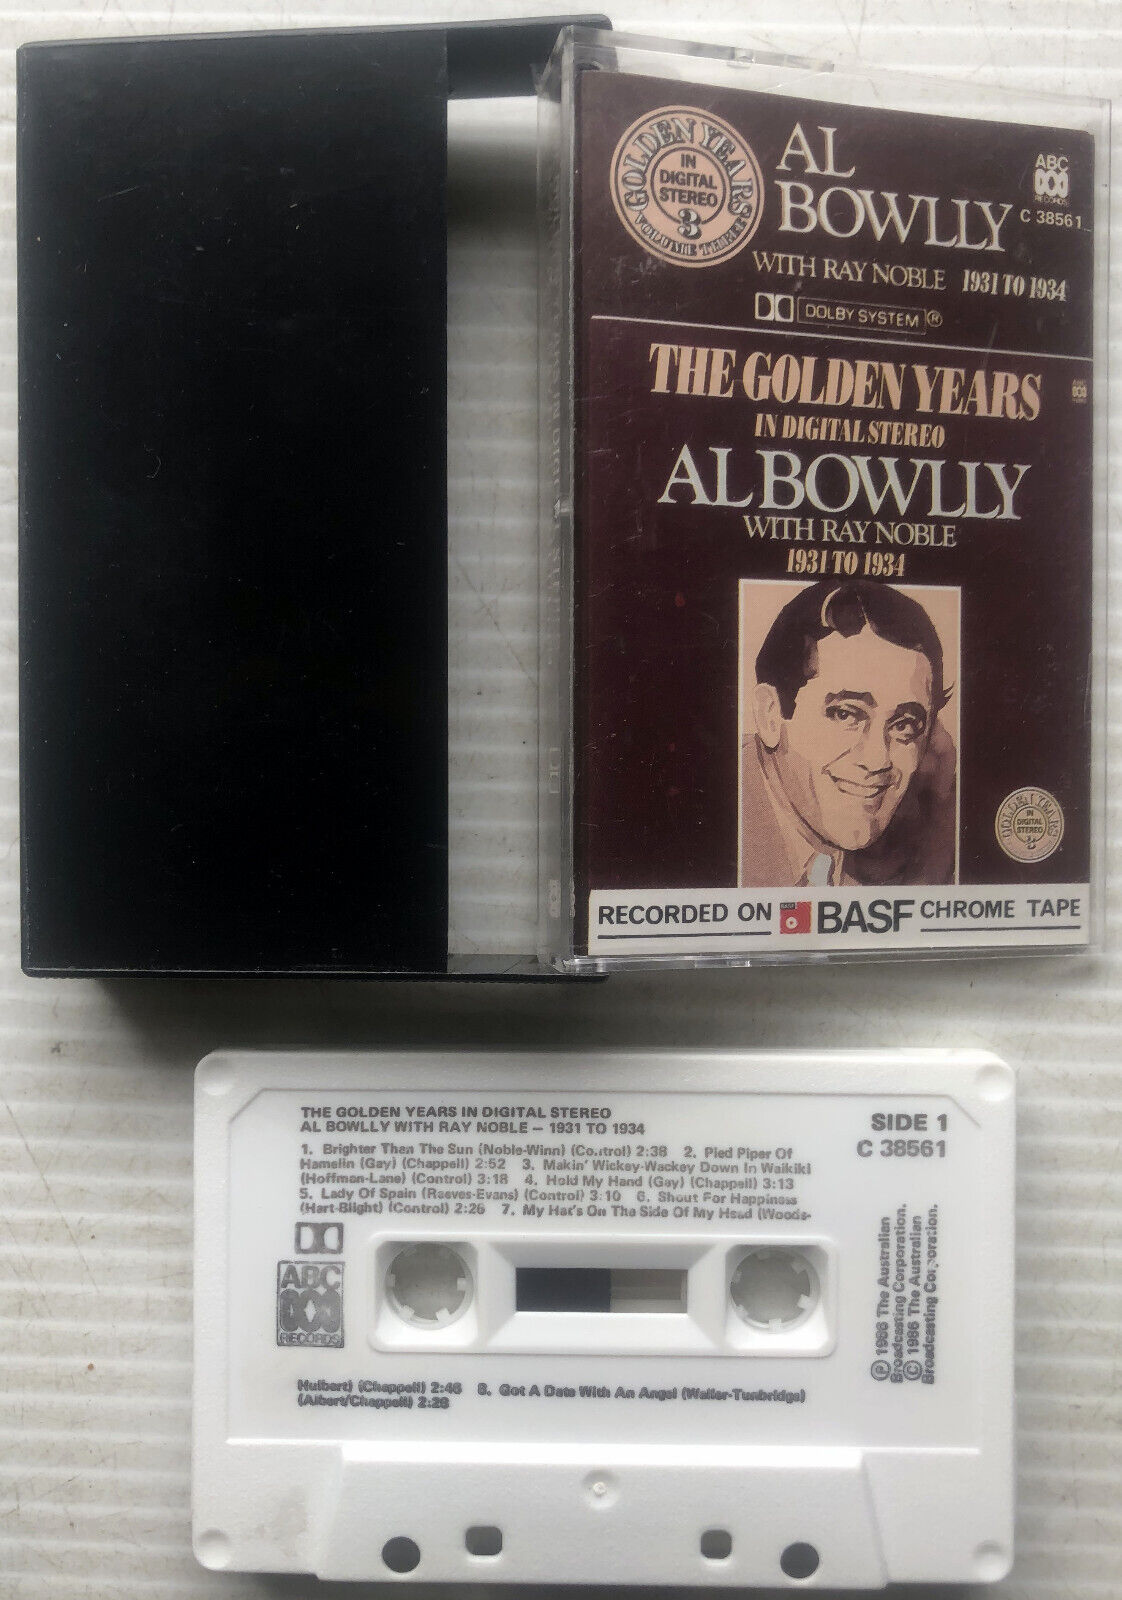 The Golden Years in Digital Stereo Al Bowlly with Ray Noble 1931-1934 (Cassette)